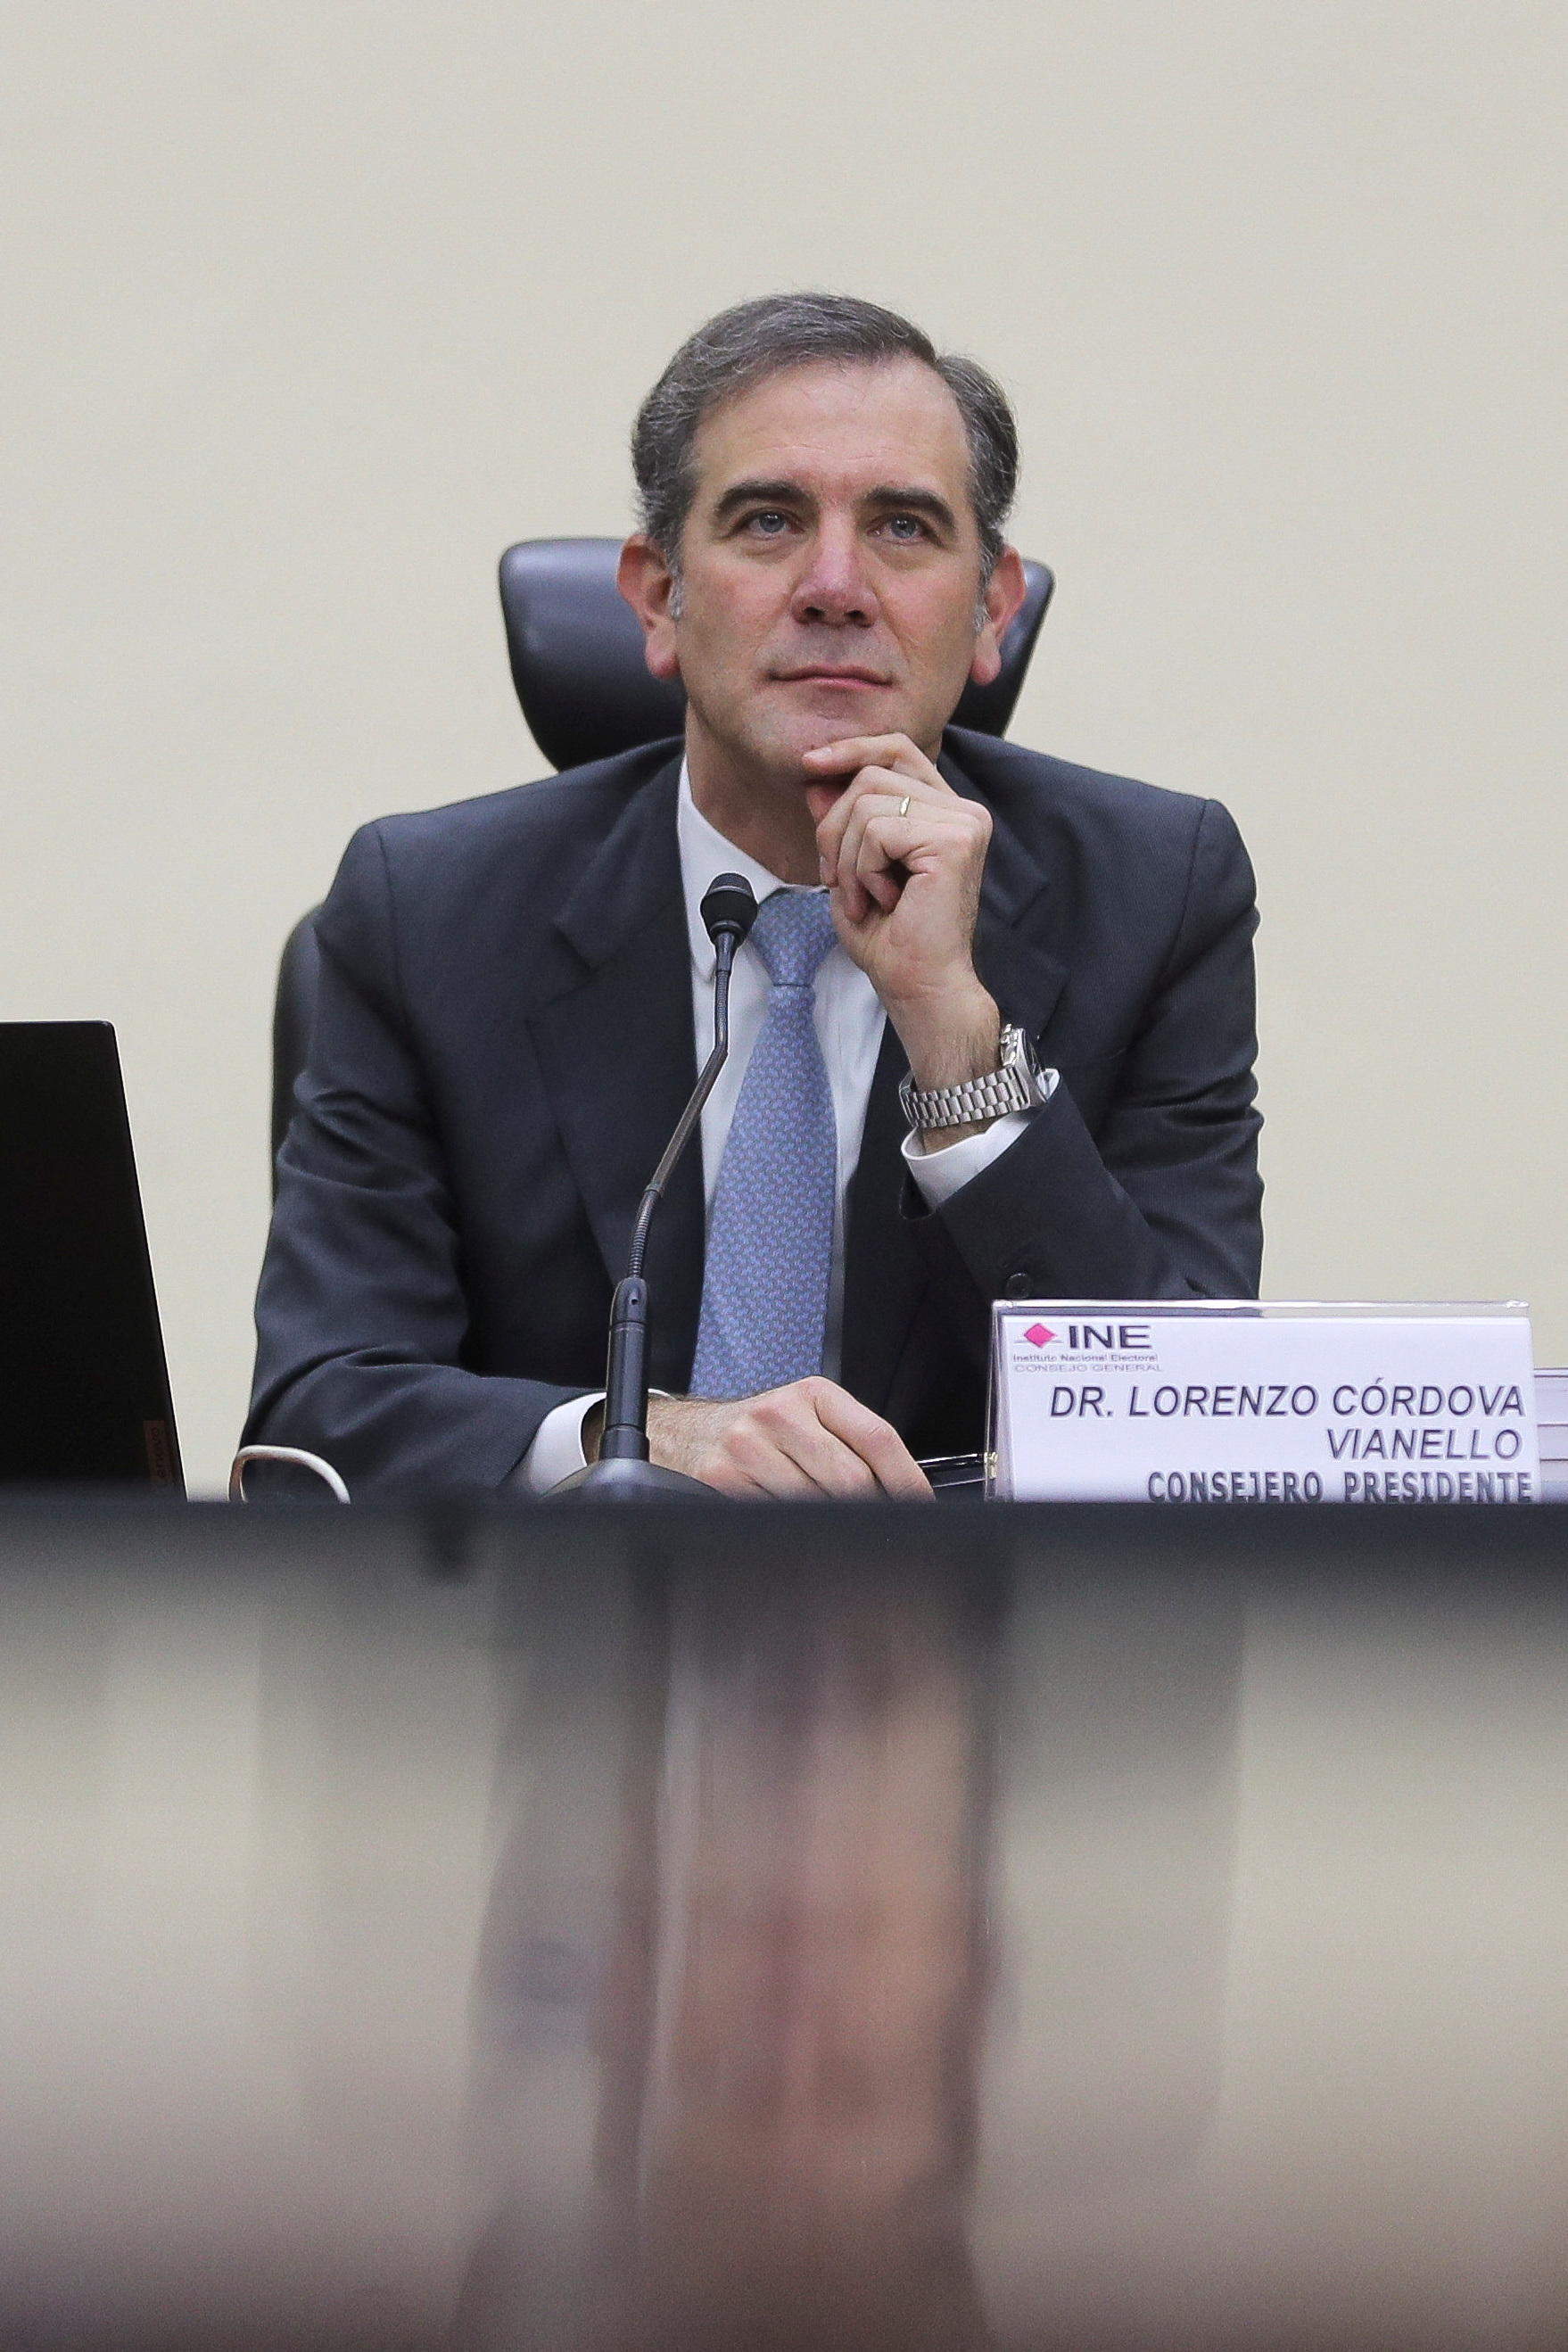 Lorenzo Cordova Vianello, President of the National Electoral Institute (INE), looks on during a general council session of the INE in Mexico City, Mexico. March 3, 2023. REUTERS/Raquel Cunha